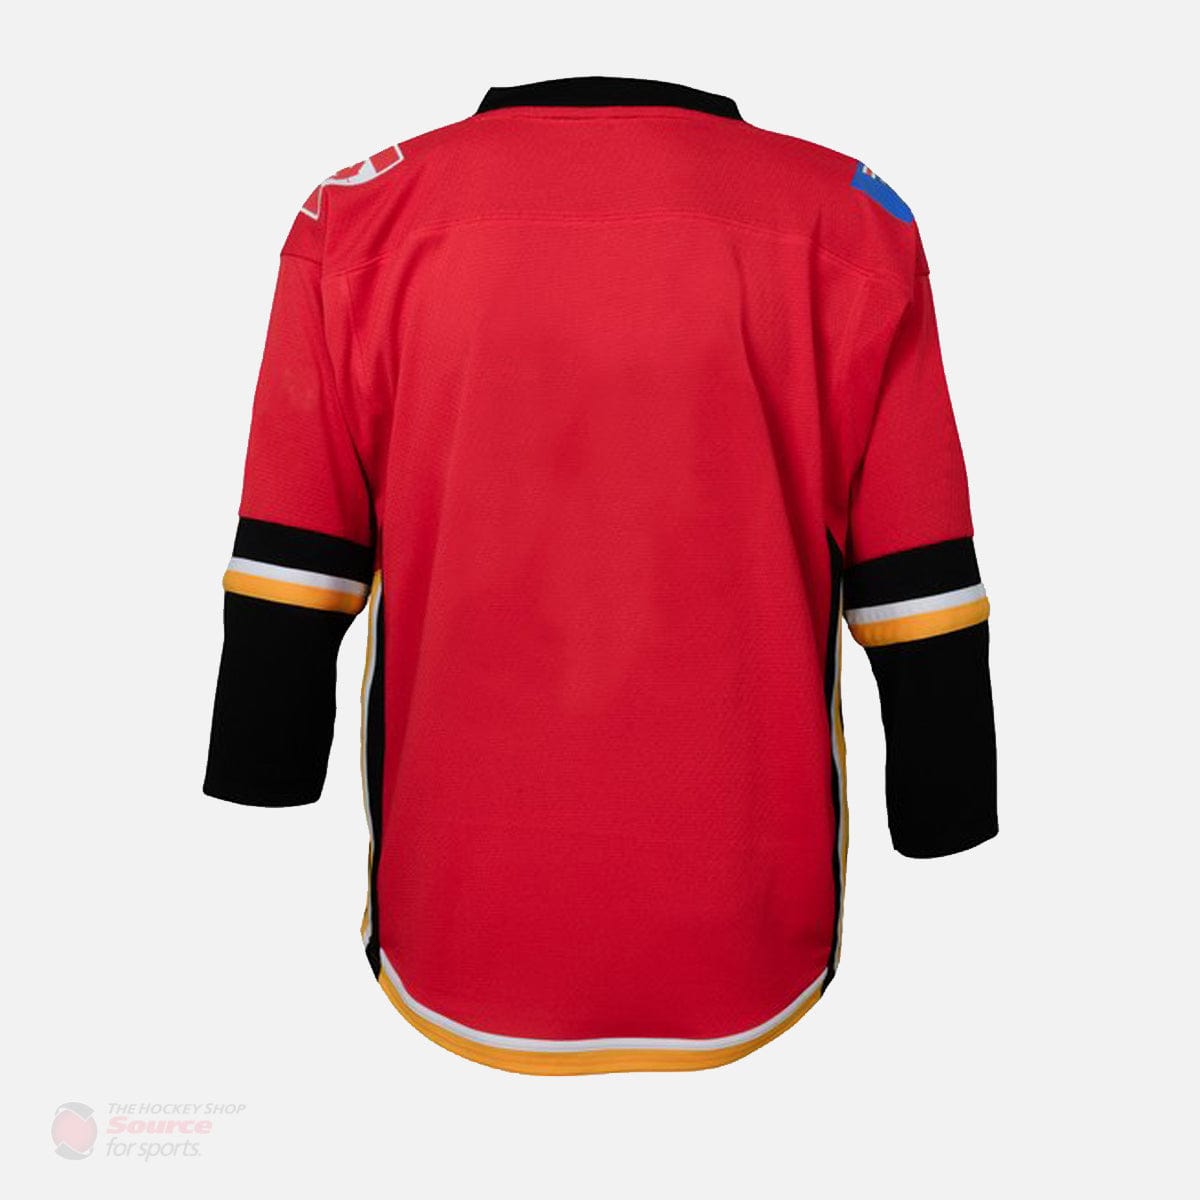 Calgary Flames Home Outer Stuff Replica Toddler Jersey